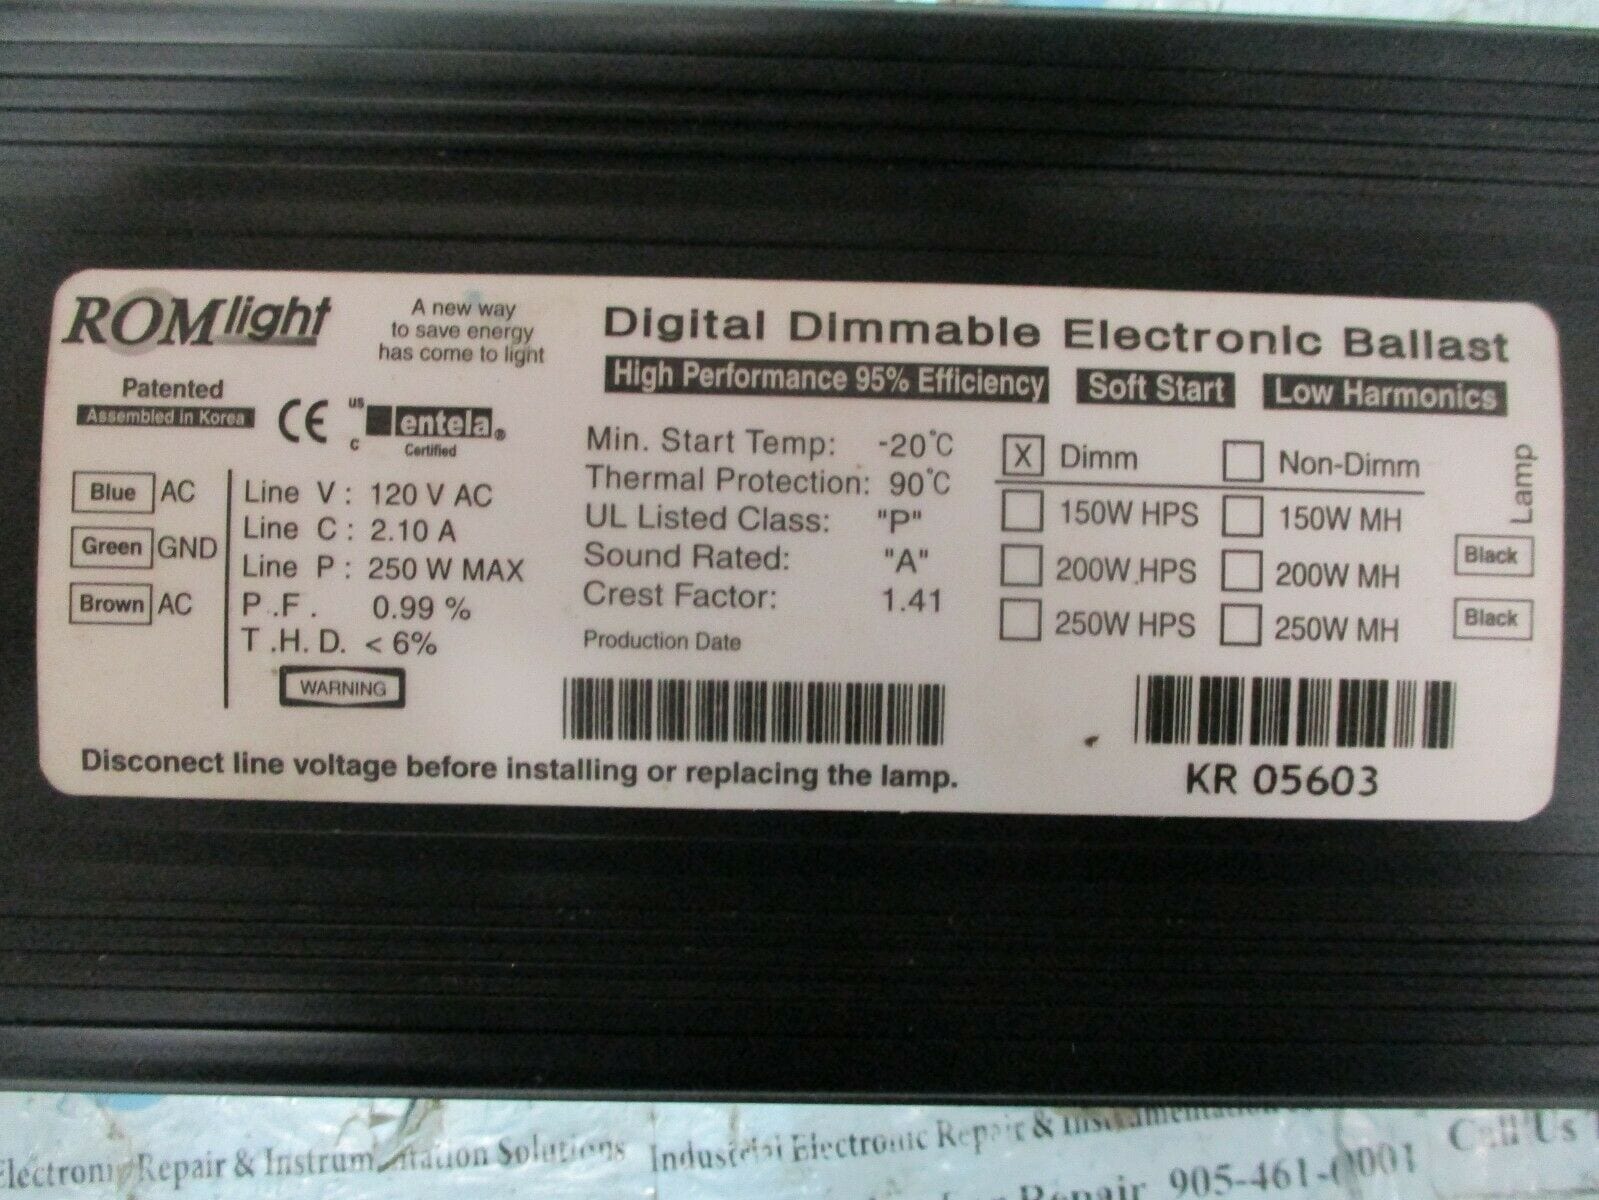 ROM light Digital Dimmable Electronic Ballast 120VAC 250W ROMlight Ente *Tested* 